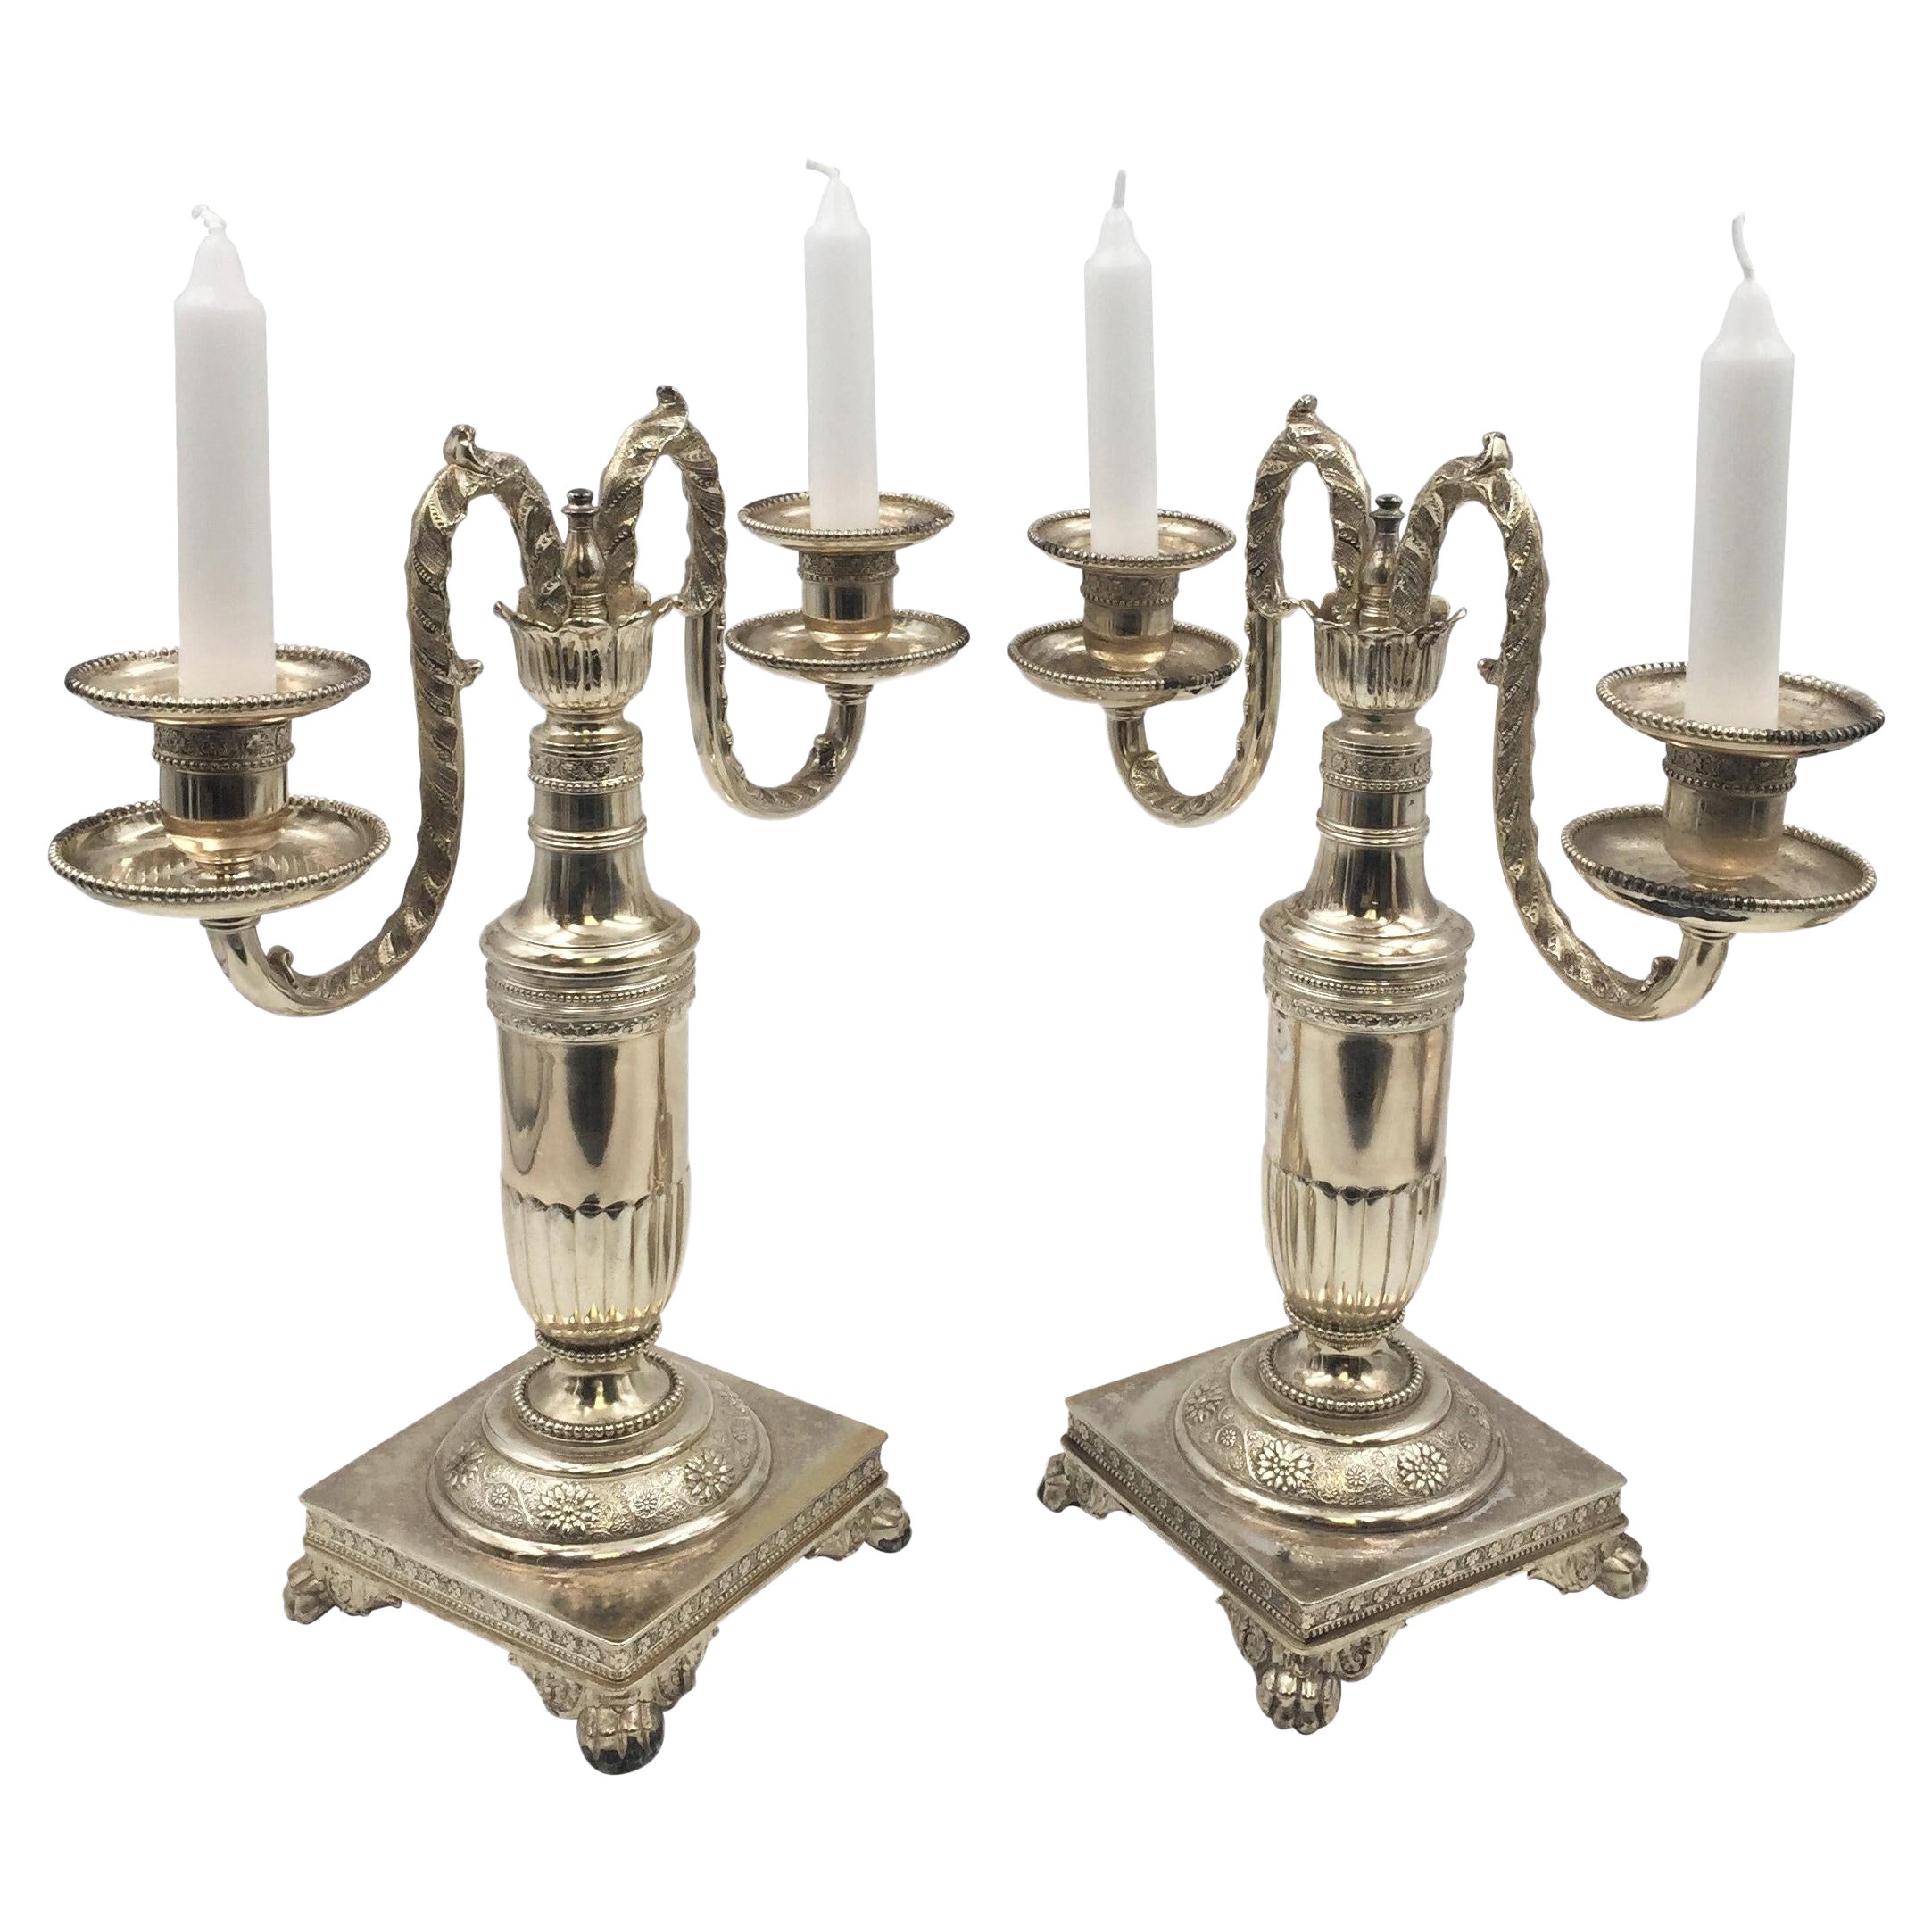 Pair of Tiffany & Co. 1877 Silver 2-Light Candelabras